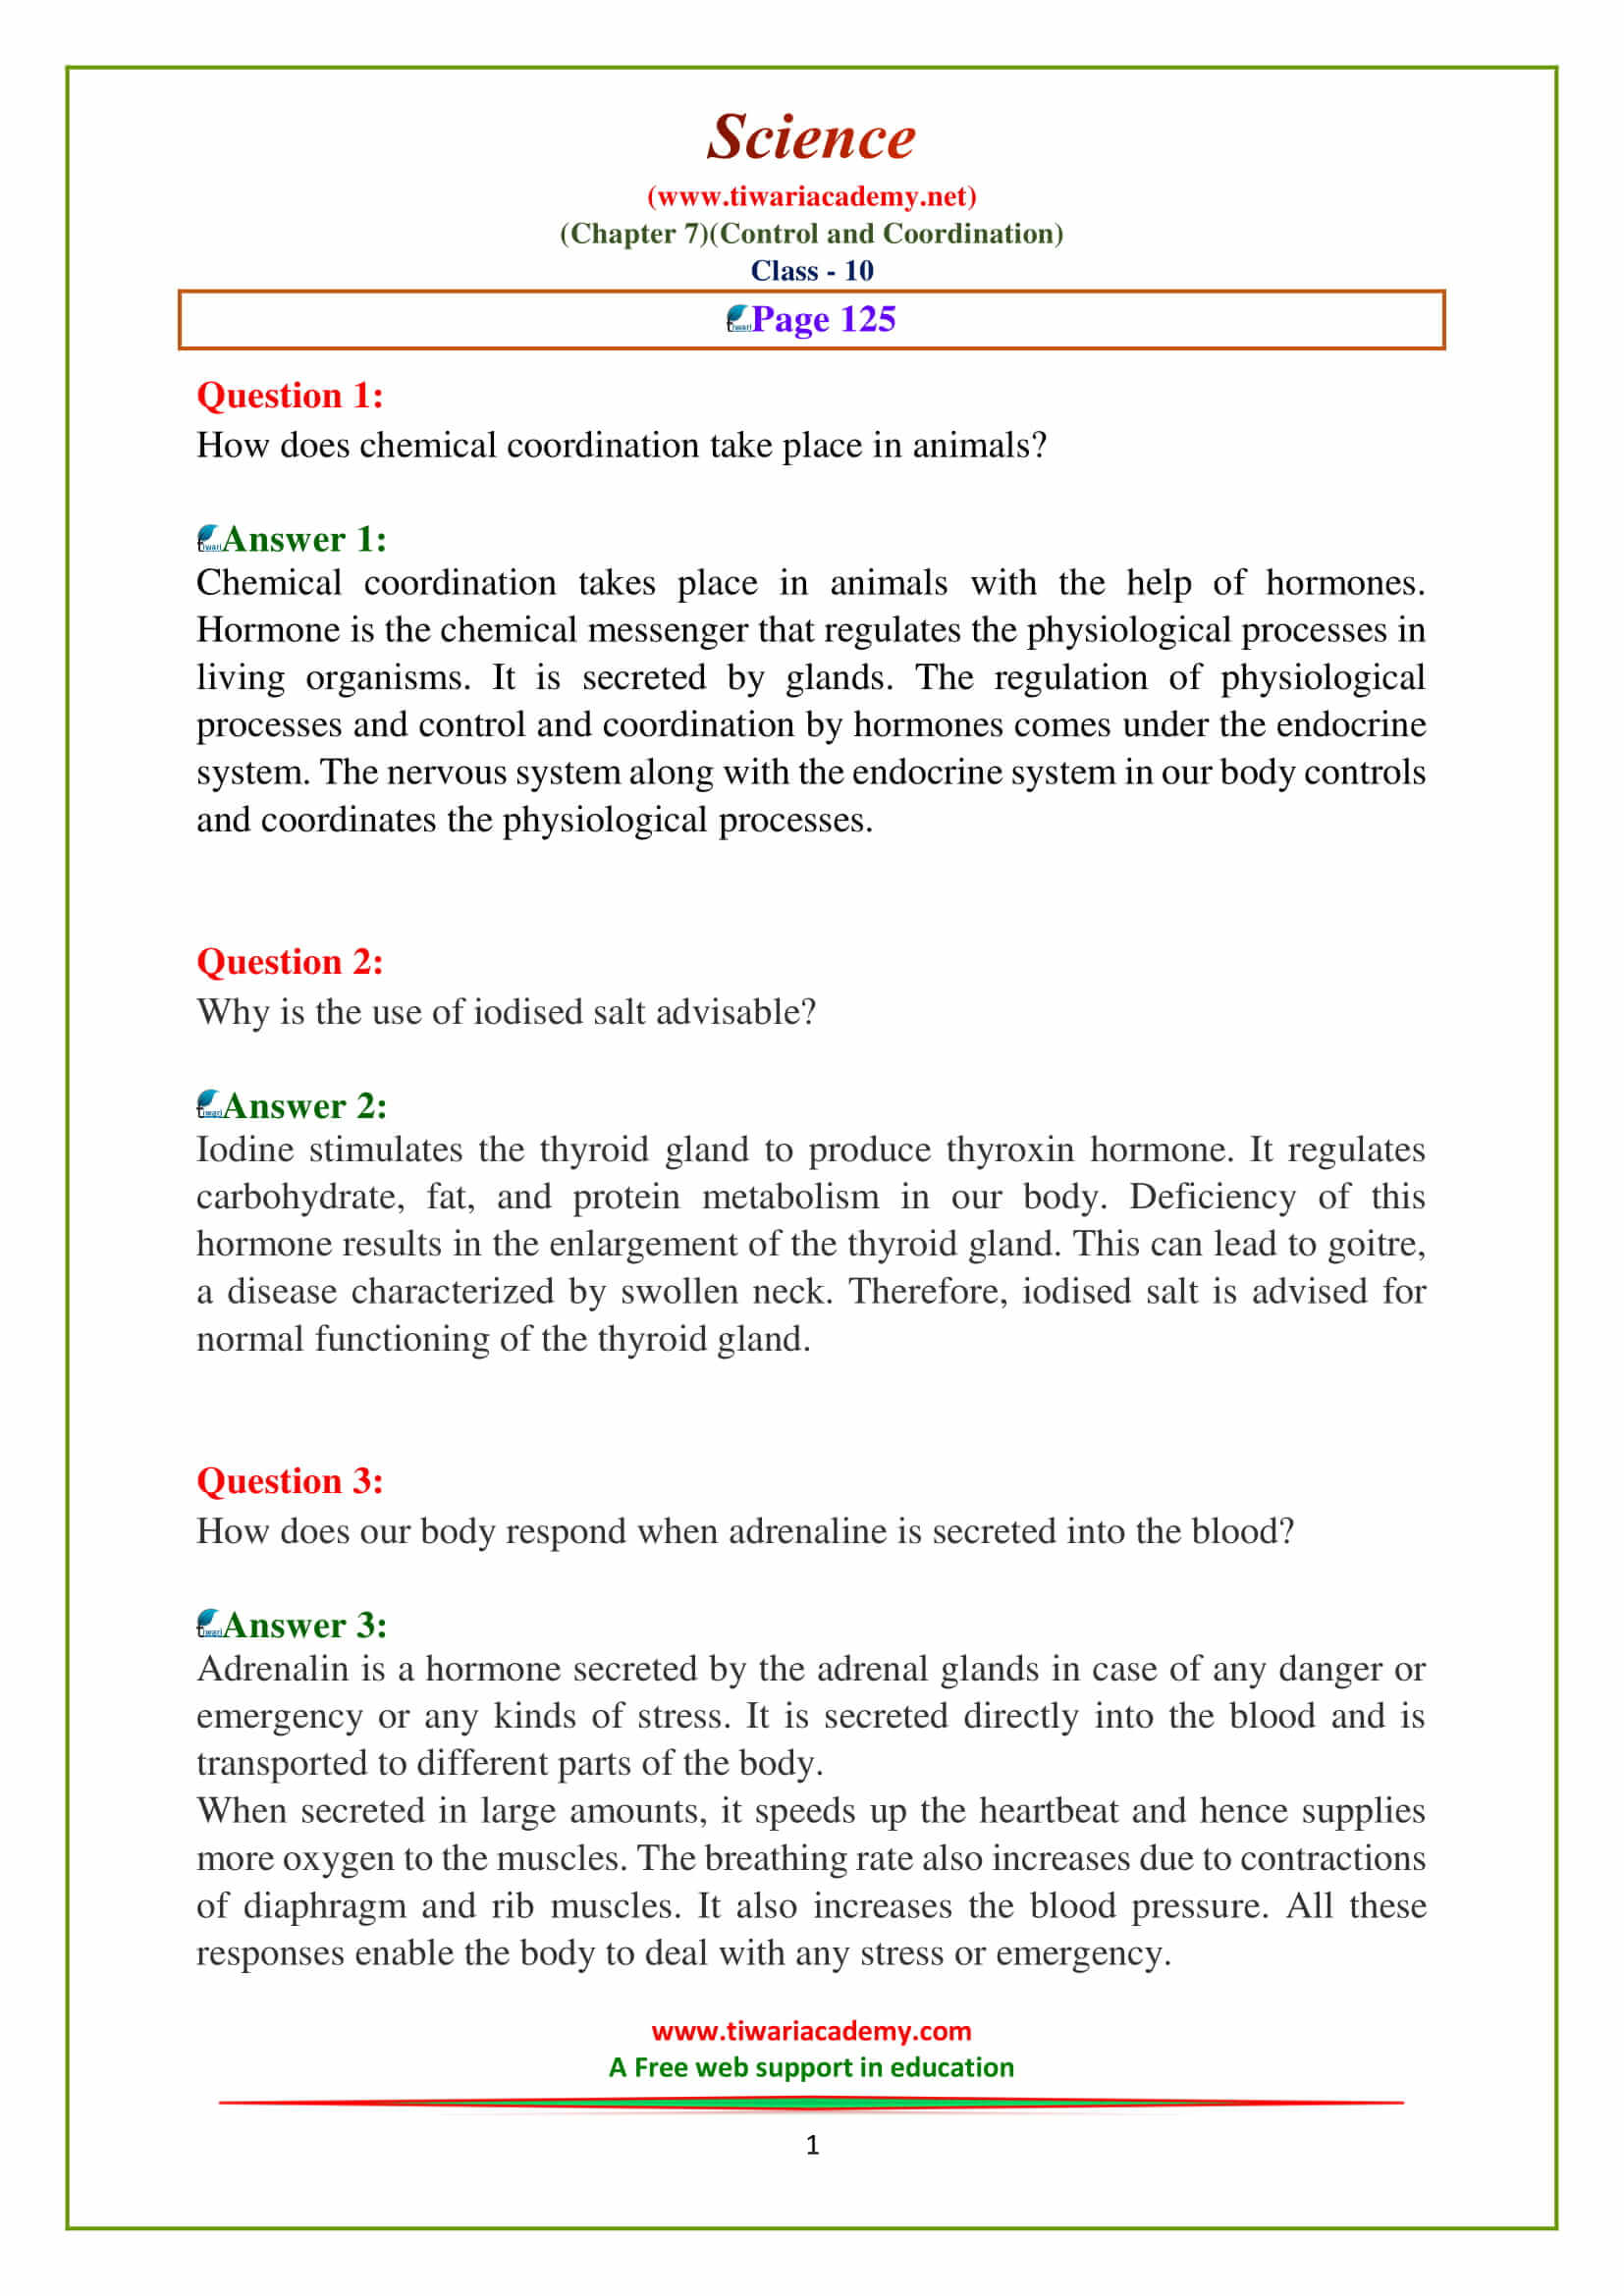 NCERT Solution for Class 10 Science Chapter 7 Control and Coordination